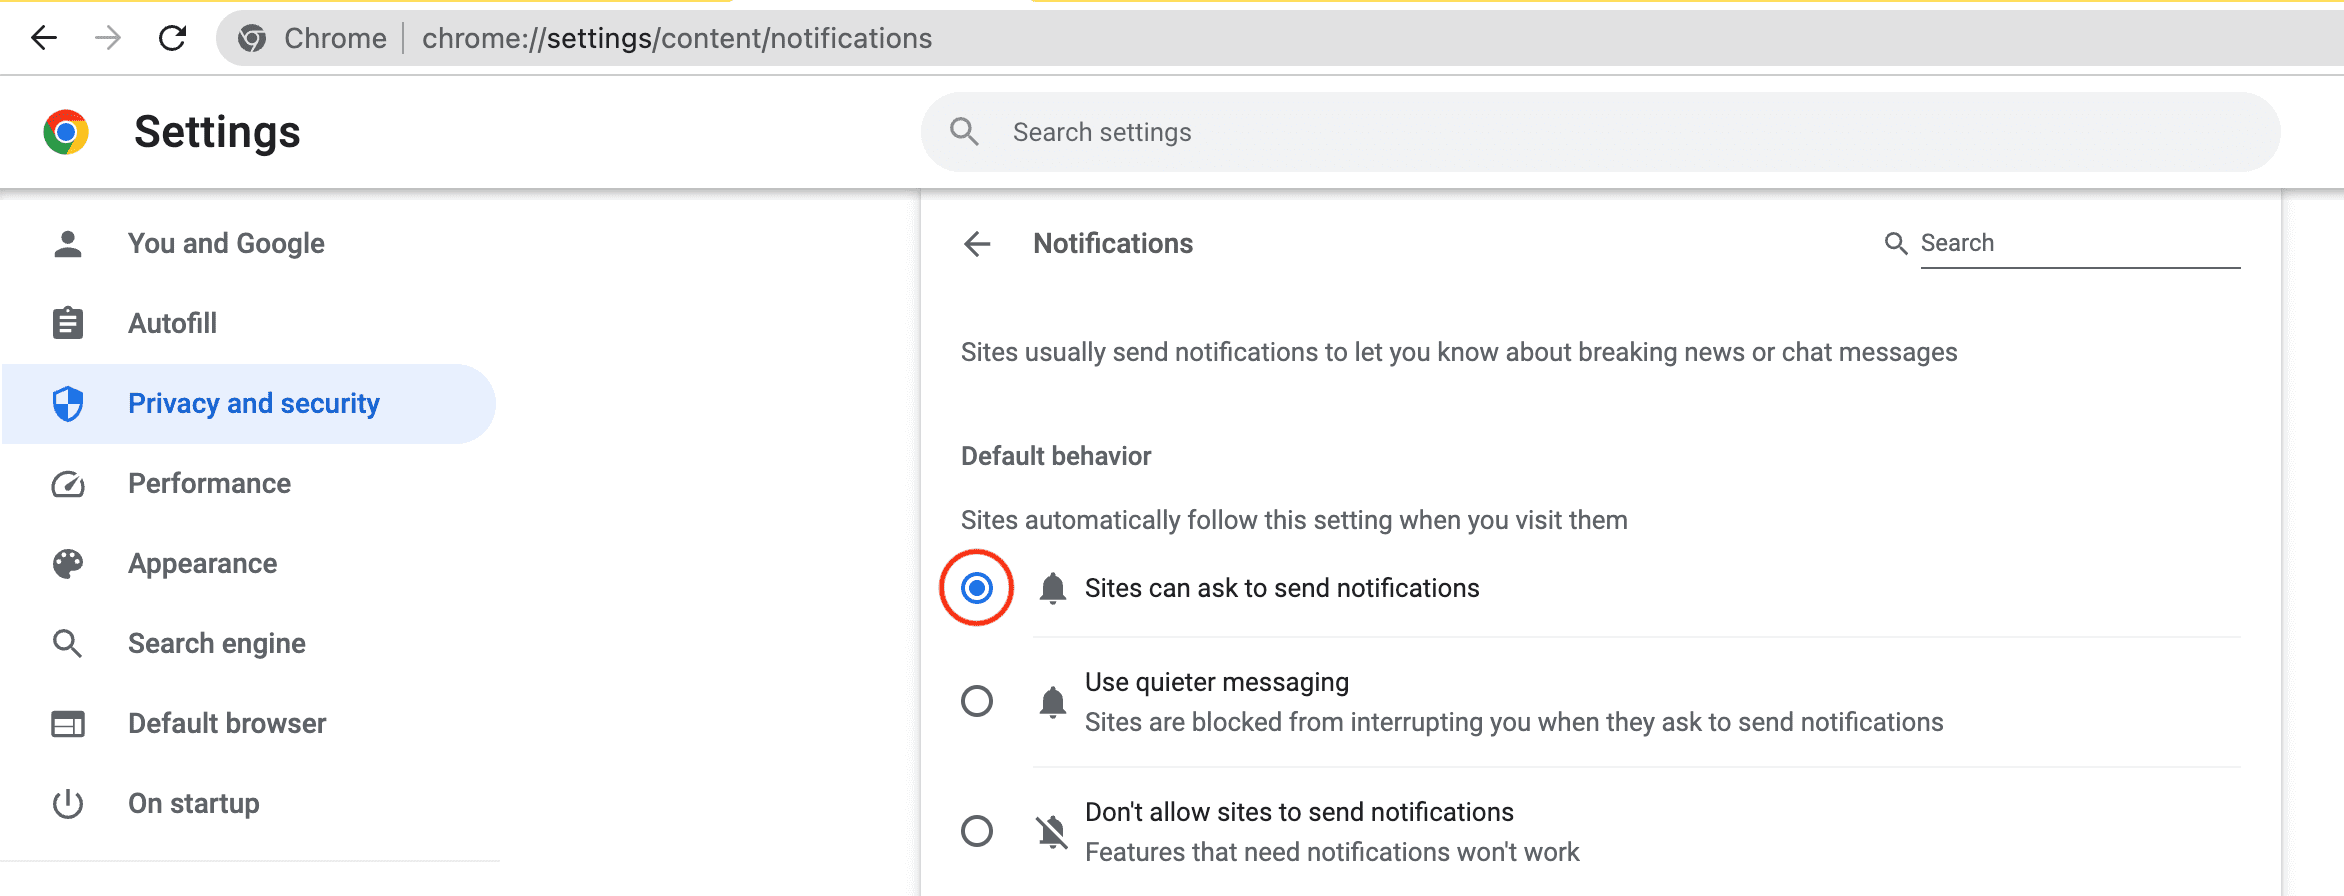 Sites can ask to send notifications in Chrome